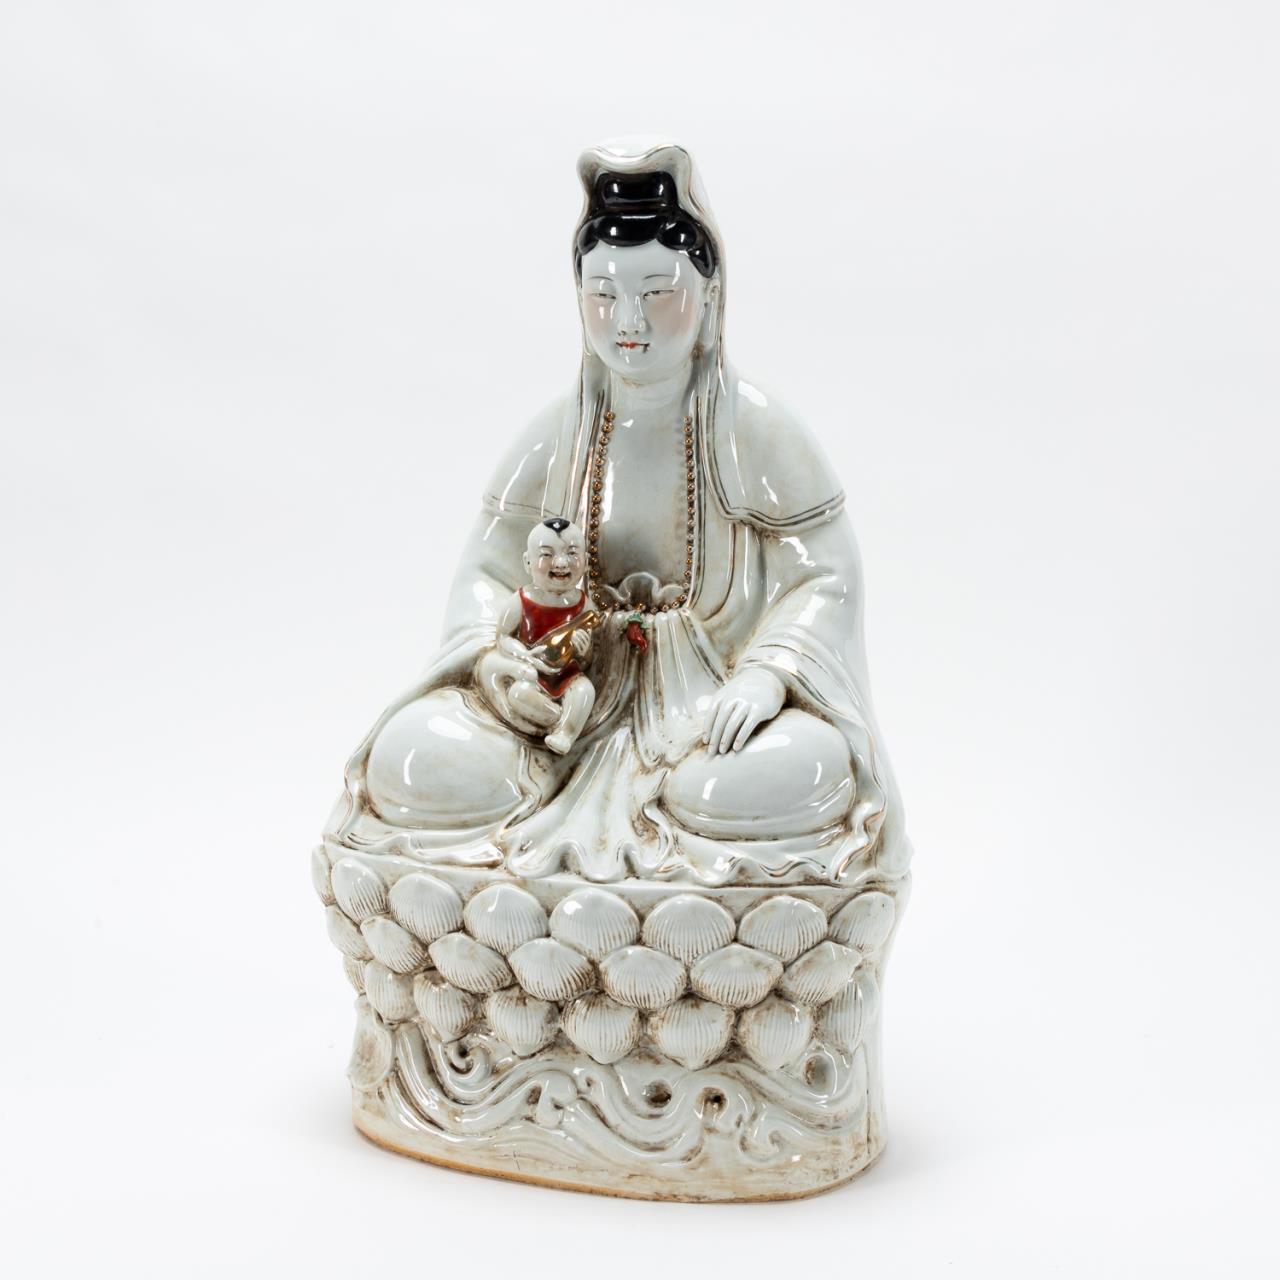 CHINESE LARGE SEATED GUANYIN, "BRINGER